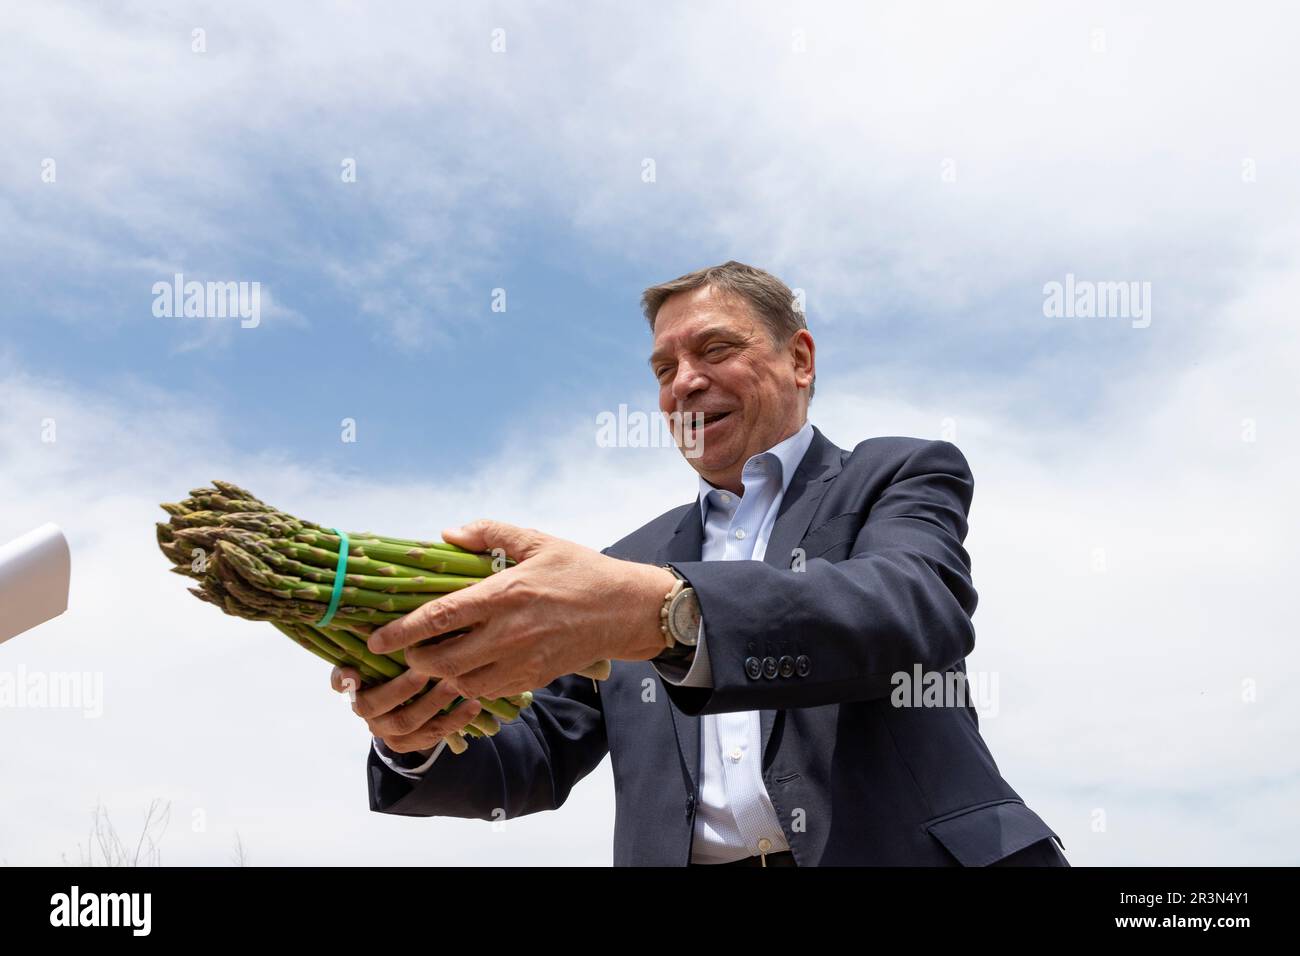 Luis Planas. Minister of Agriculture, Fisheries, Food and the Environment of Spain. Public figure on the street. Photography. MADRID, SPAIN - MAY 23, Stock Photo